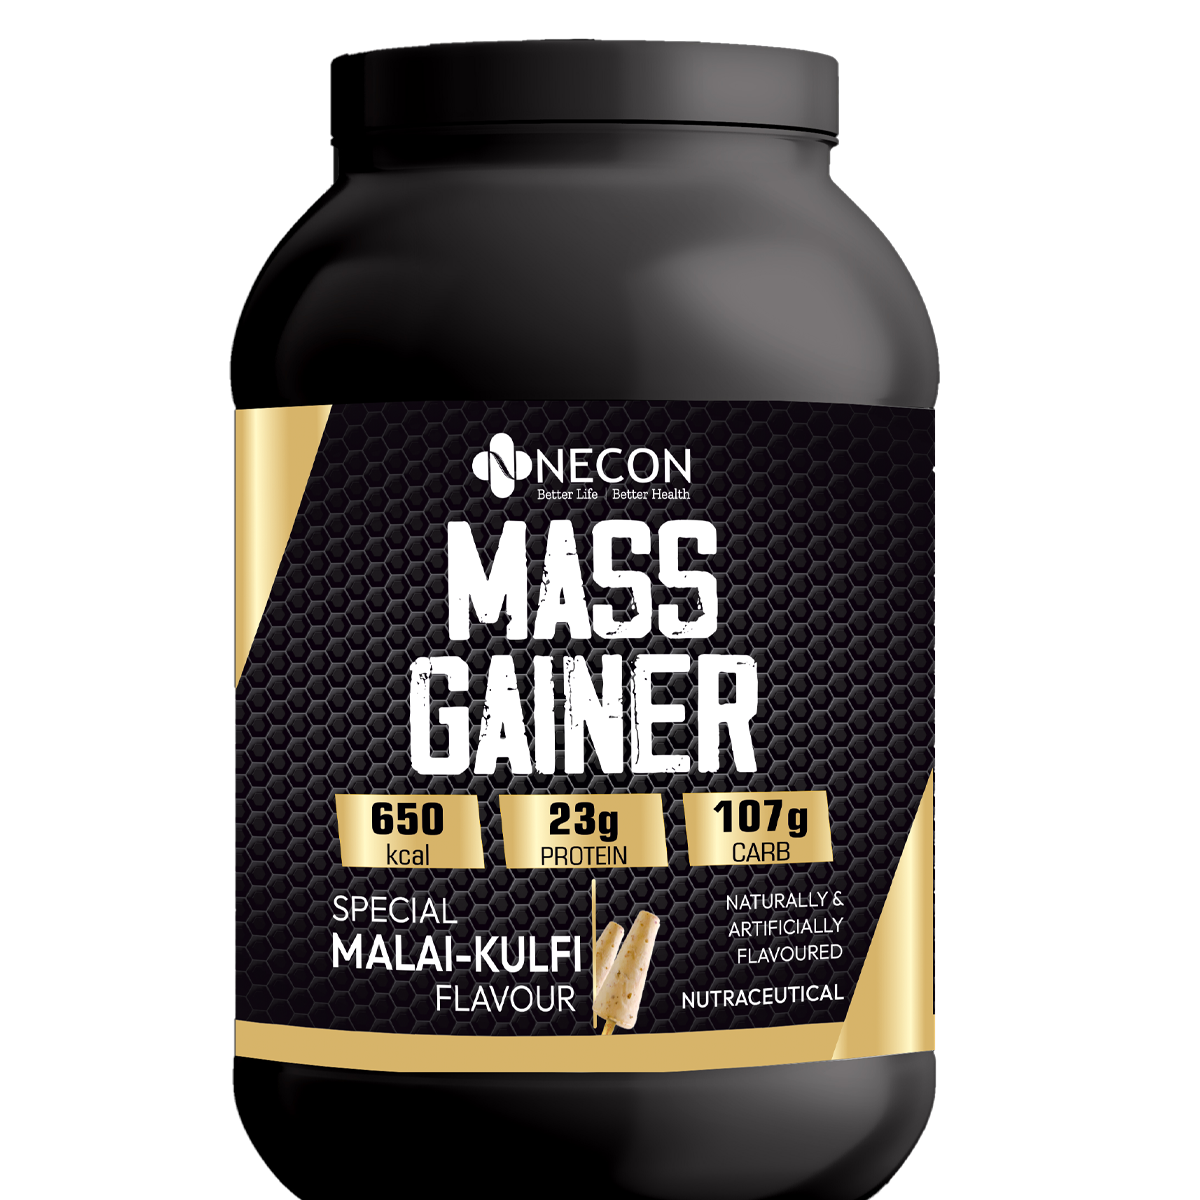 Necon Mass High Protein High Calorie Weight Gainer Powder Flovour Special Malai-Kulfi-1 kg with Vitamins and Minerals, Vegetarian